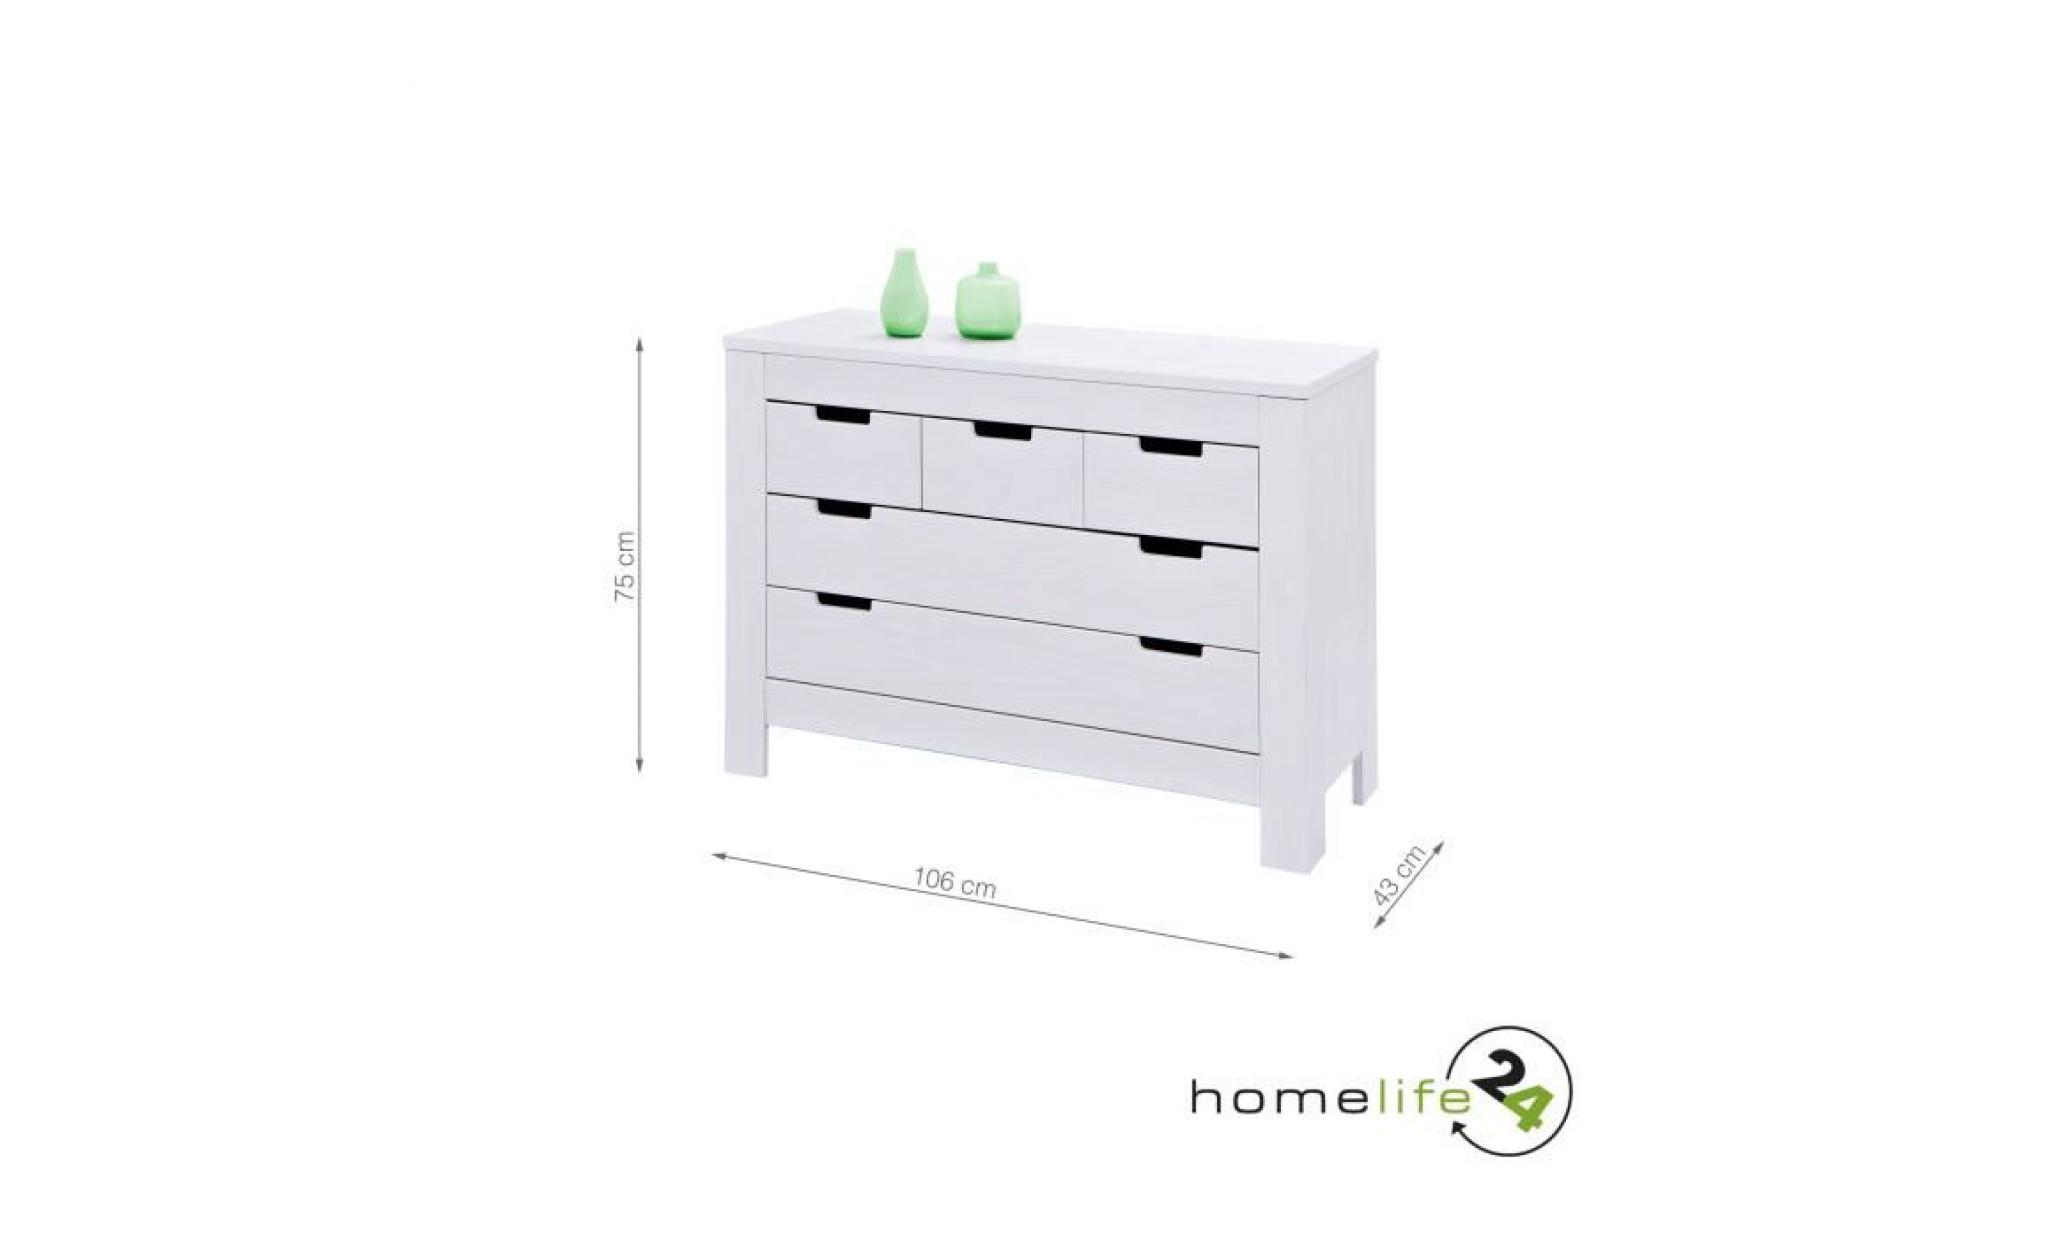 grande commode 5 tiroirs, commode en pin massif, commode chambre blanche, commode chiffonnier, armoire commode, meuble en pin pas cher